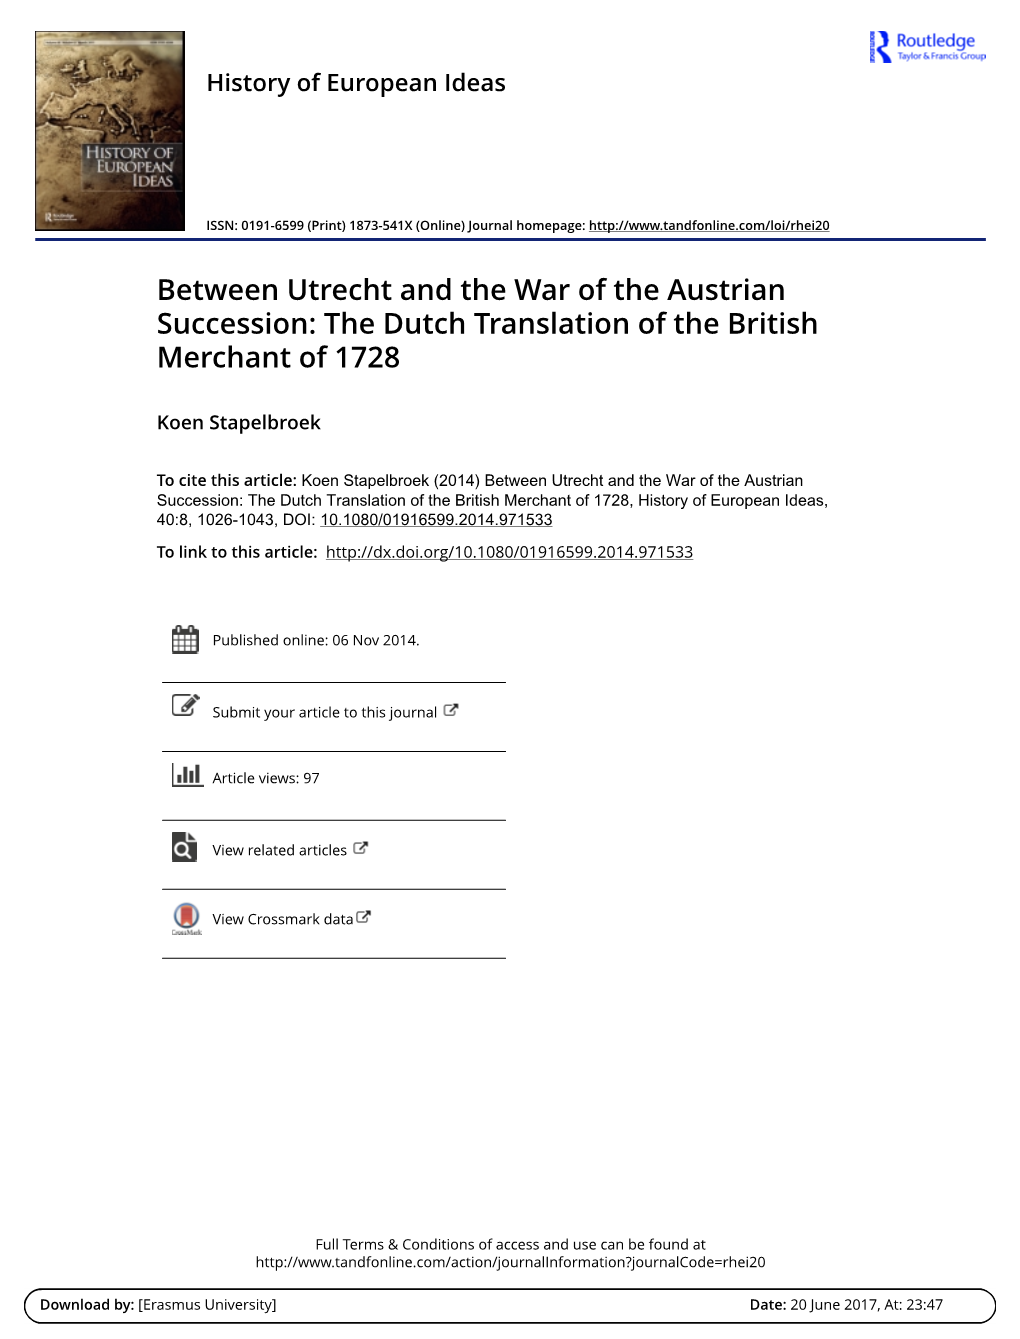 Between Utrecht and the War of the Austrian Succession: the Dutch Translation of the British Merchant of 1728